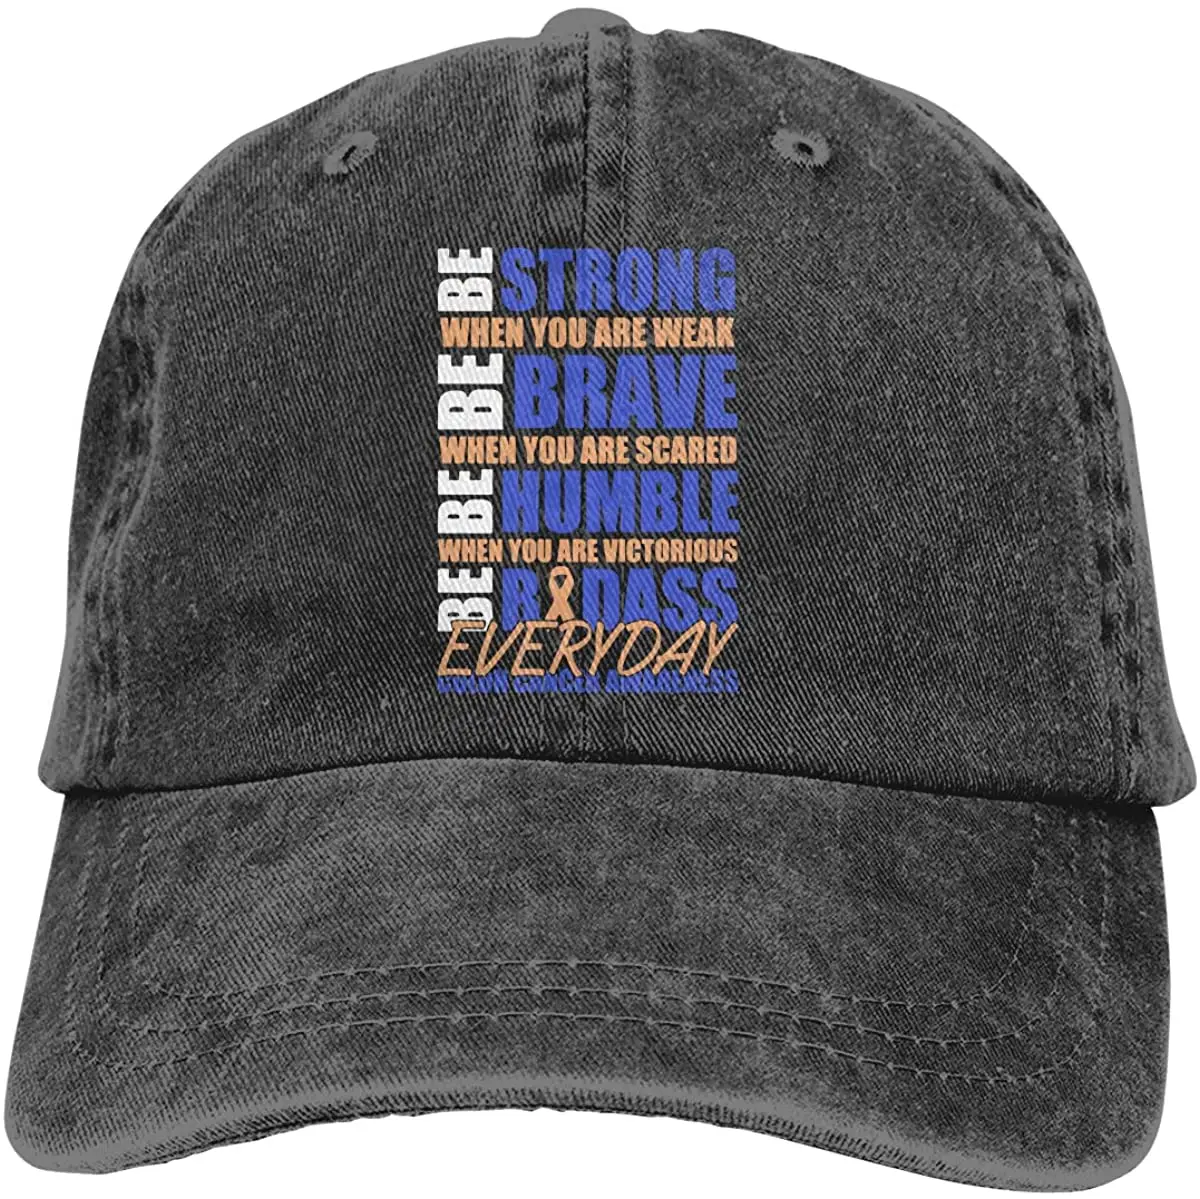 

Unisex Colon Cancer Awareness 7 Vintage Washed Twill Baseball Cap Adjustable Hats Funny Humor Irony Graphics Of Adult Gift Black